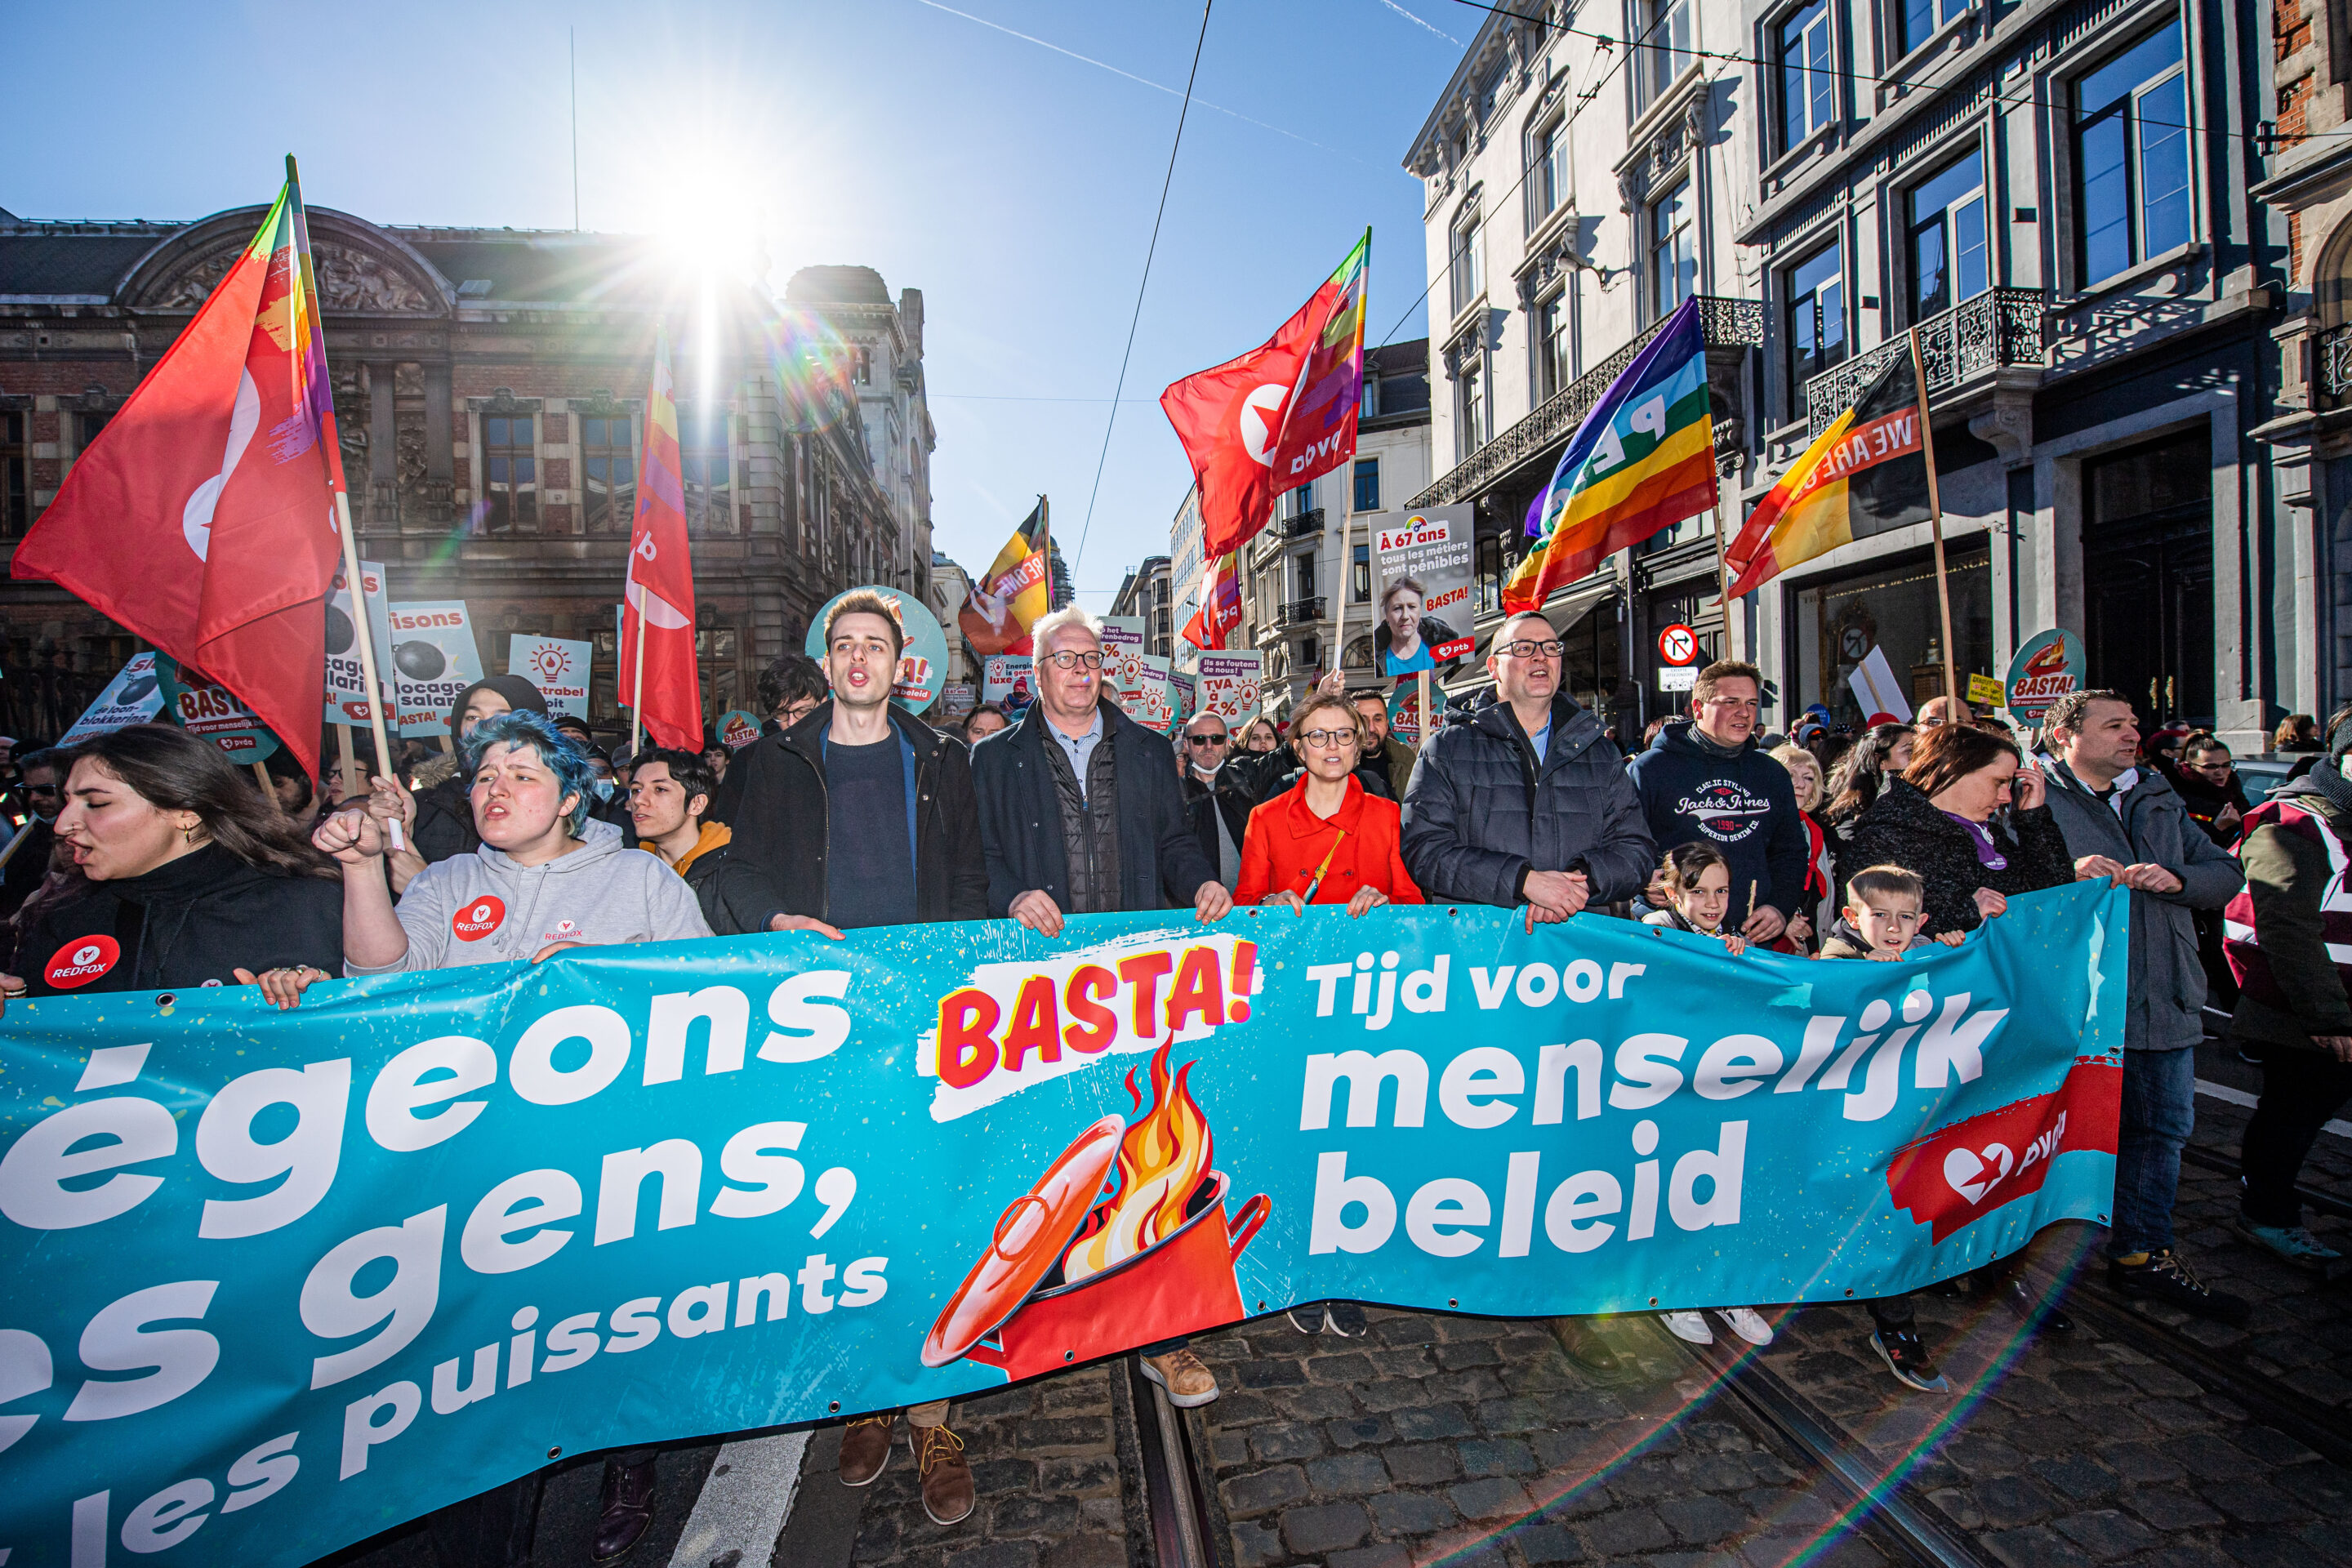 Workers of Belgium, unite! The Marxist party promising to break the mould